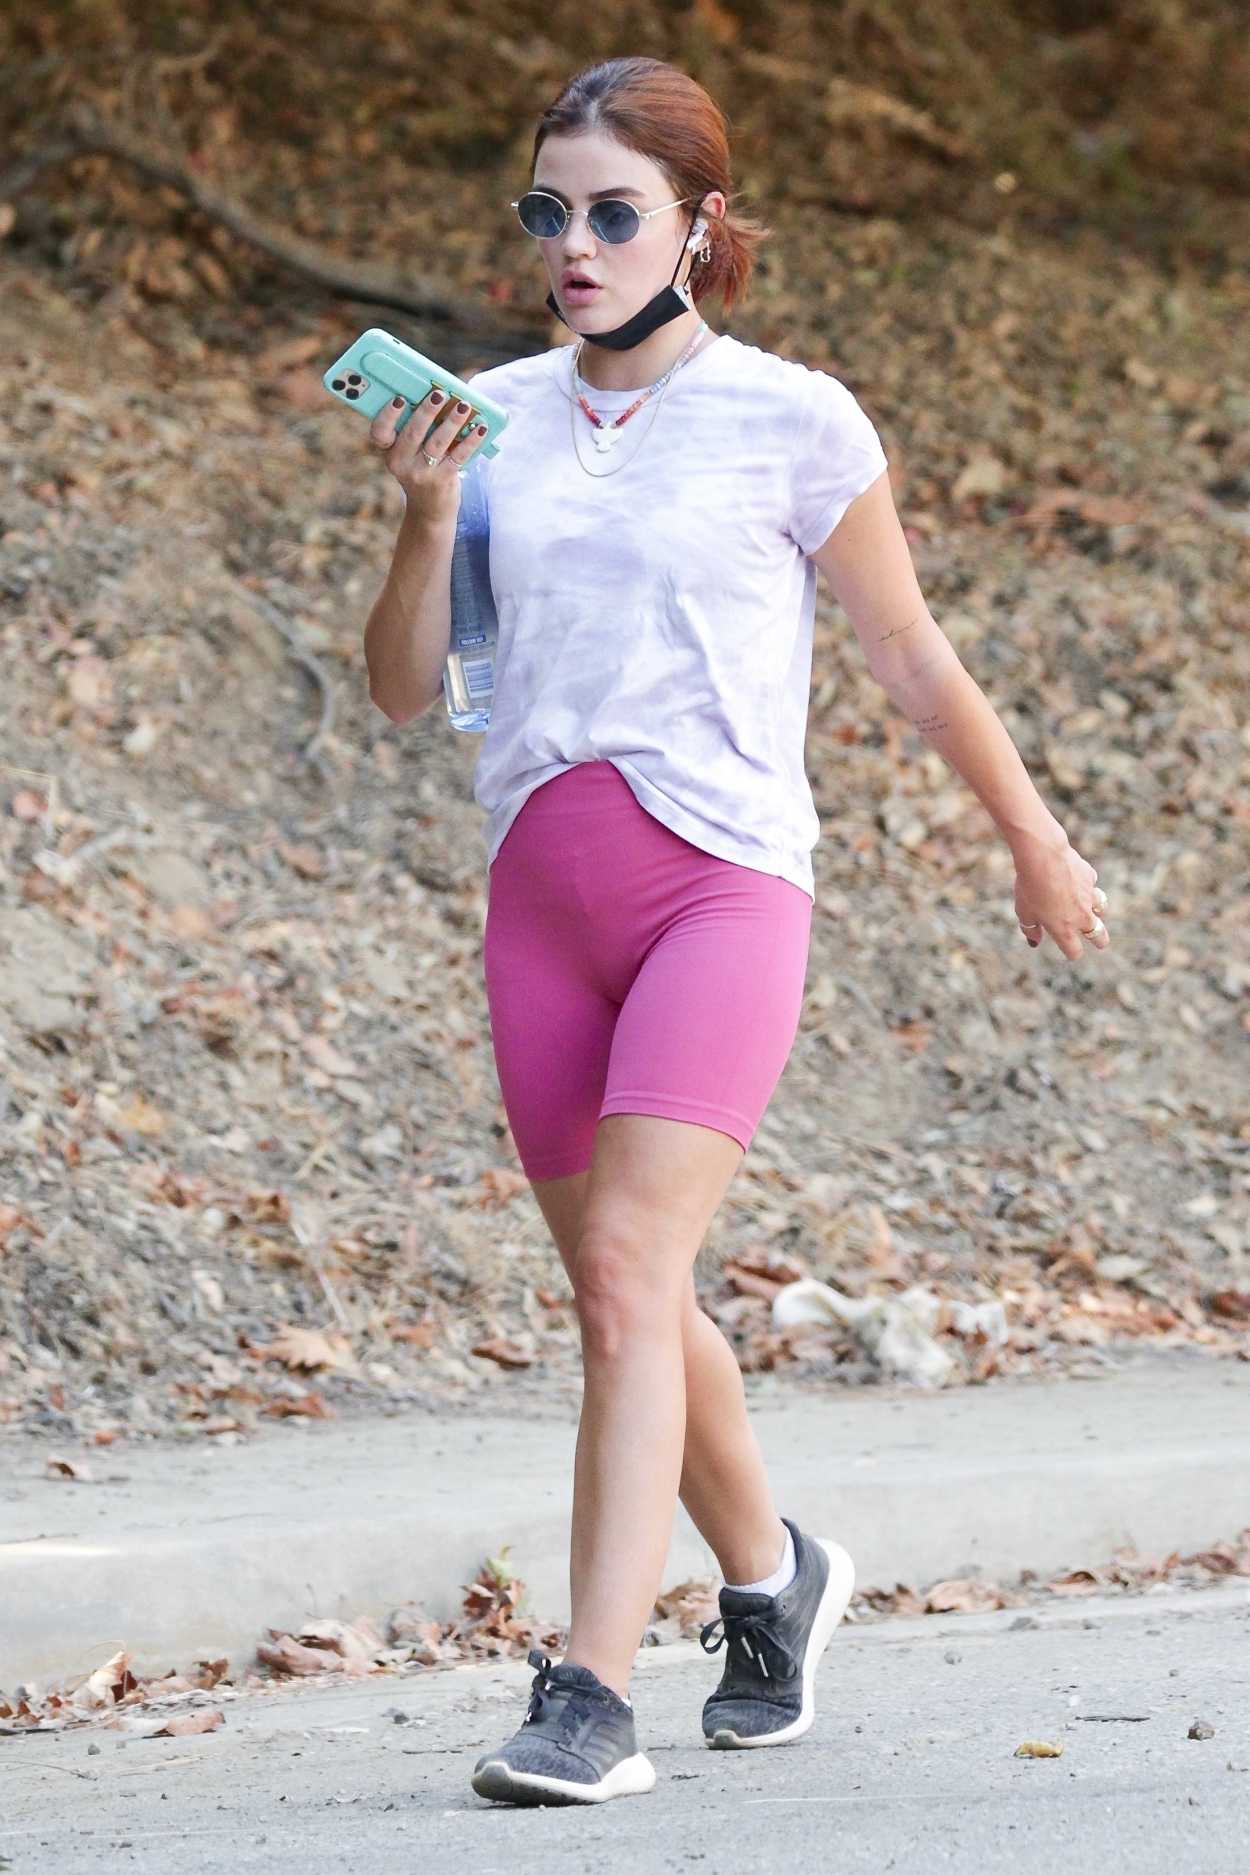 Lucy Hale in a Pink Spandex Shorts Steps Out for a Hike in Los Angeles ...